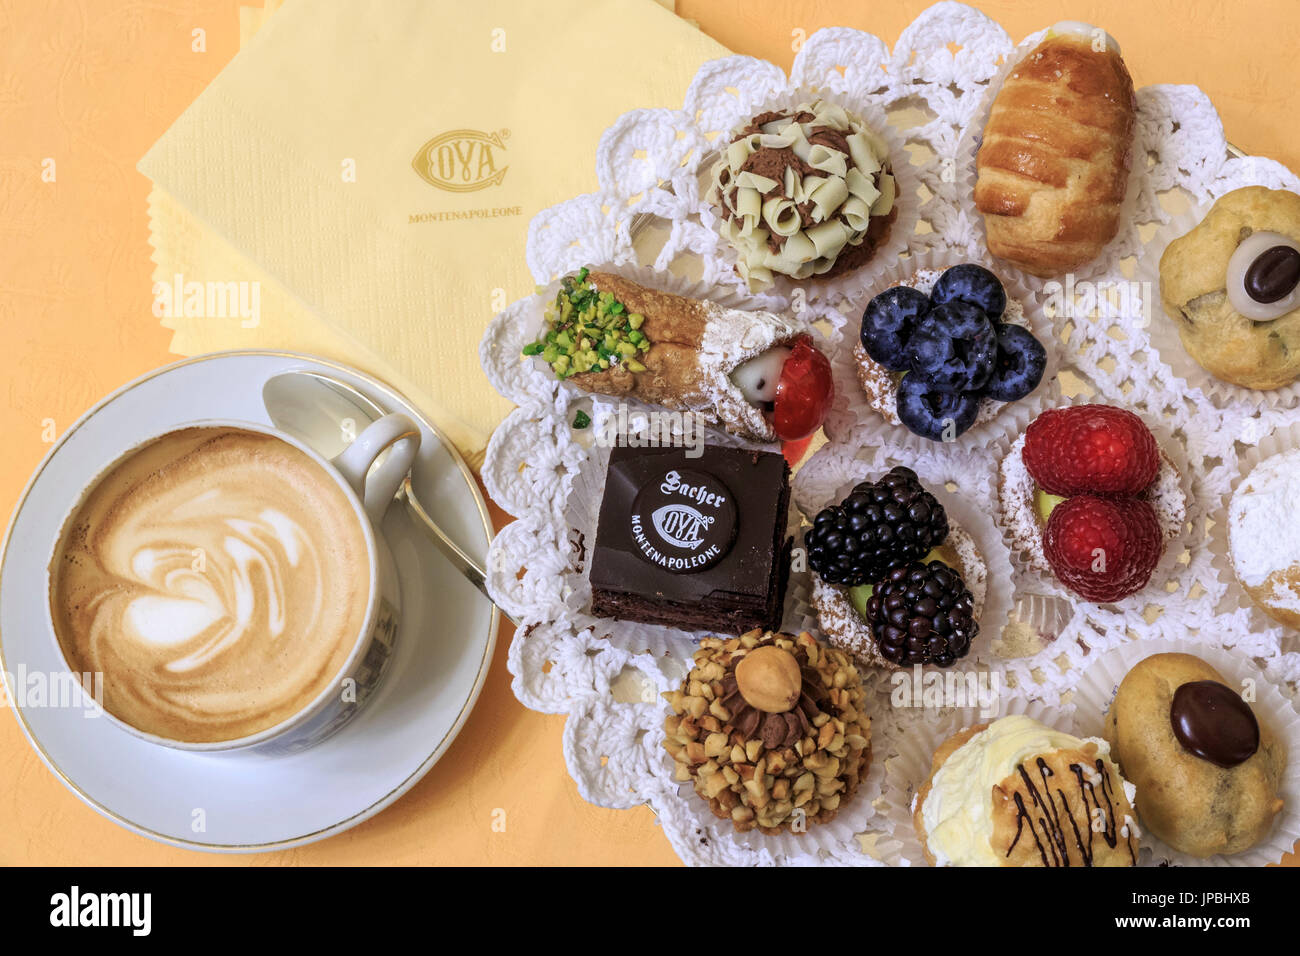 Cappuccino with typical sweets and pastries in the old Cafe Cova icon of Milan Lombardy Italy Europe Stock Photo